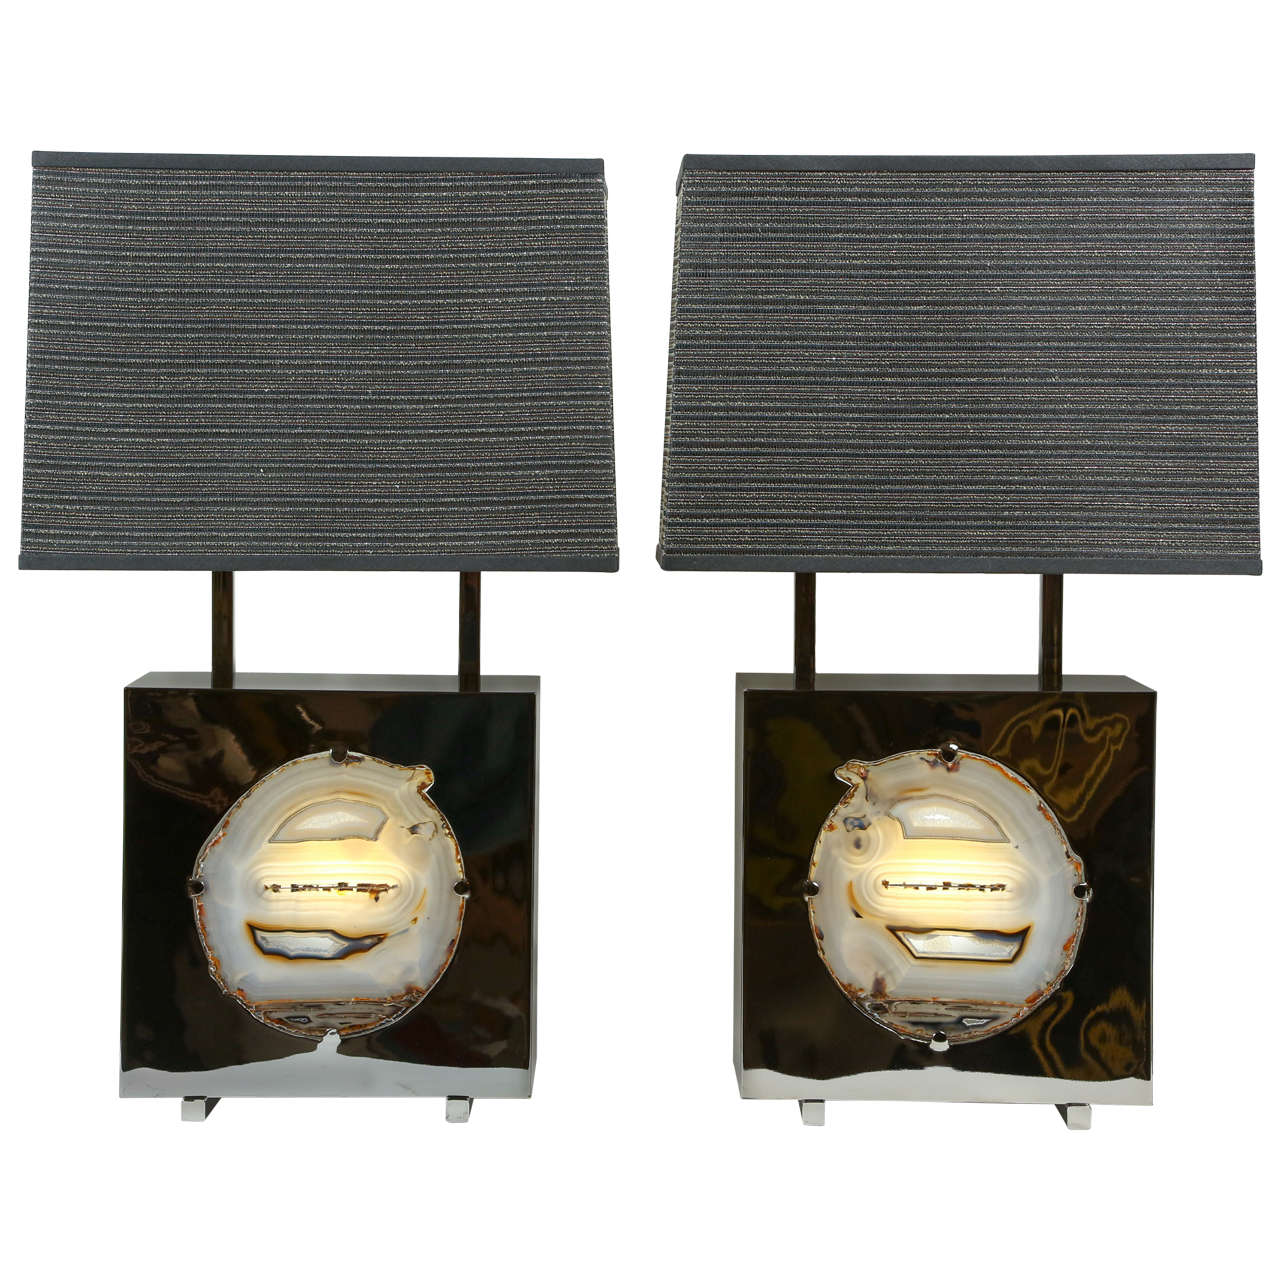 Pair of Special Edition "Pedra" Table Lamps, Dragonette Private Label For Sale